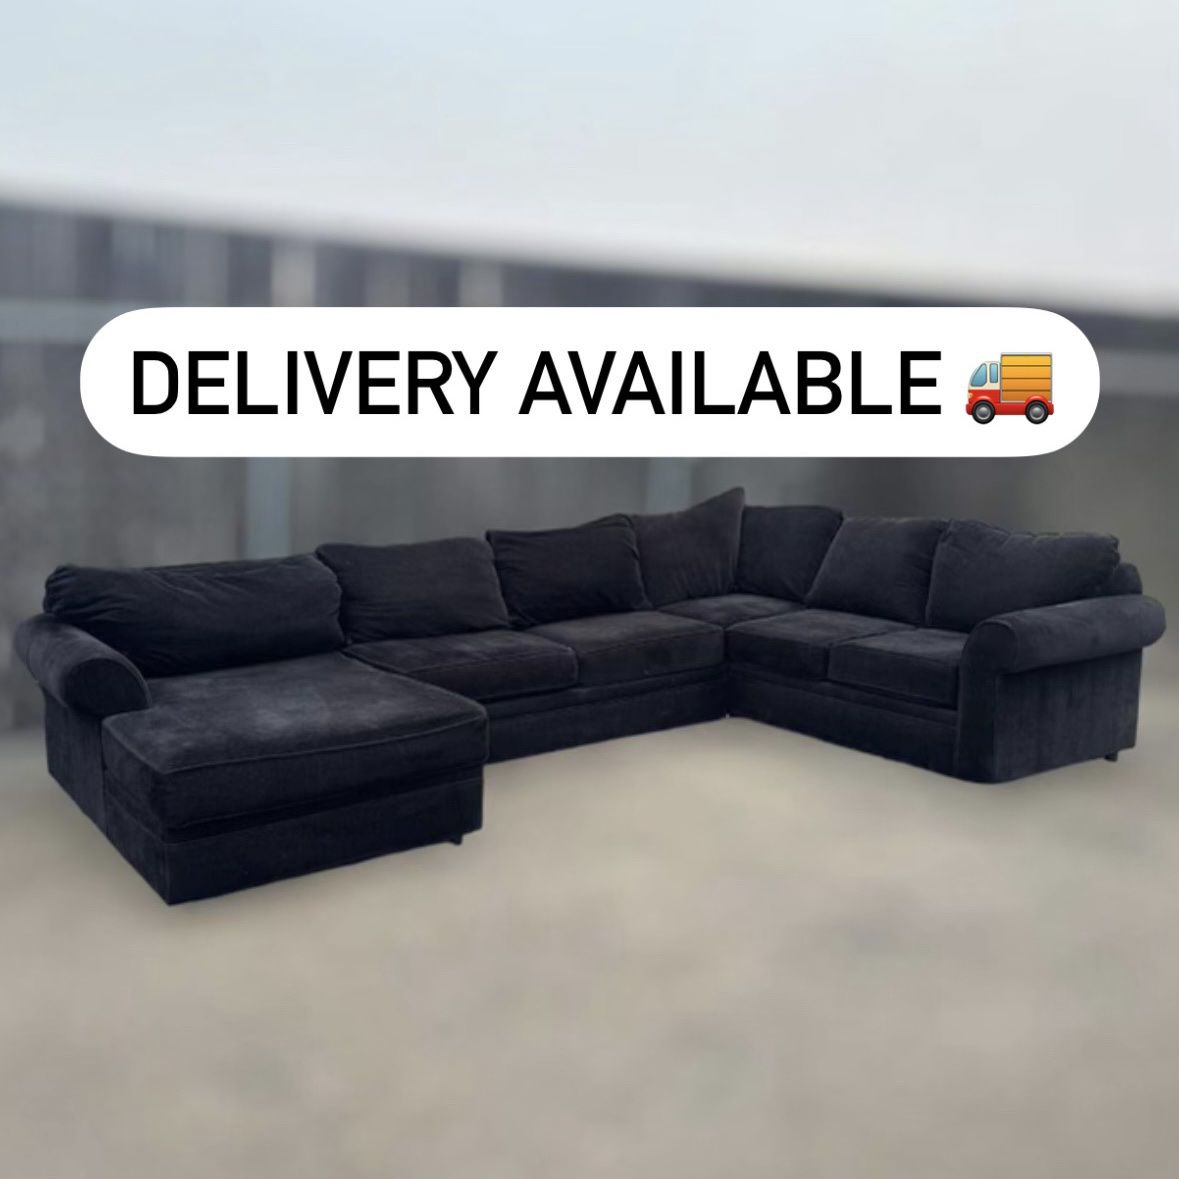 Custom Black 3 Pc Sectional Couch Sofa - 🚚 DELIVERY AVAILABLE 